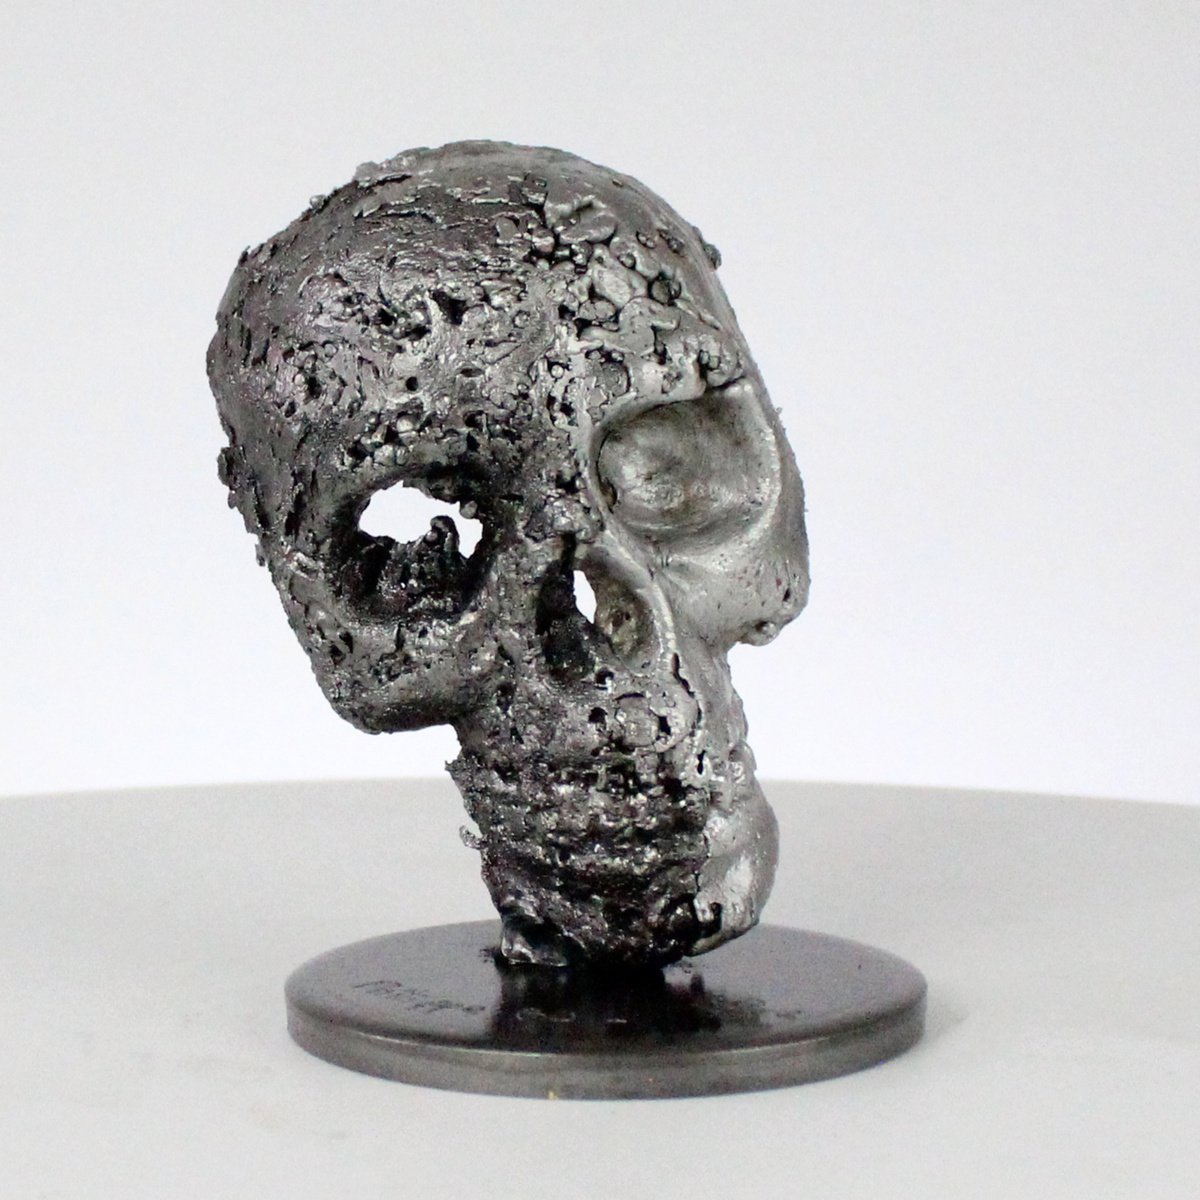 Skull 102-21 by Philippe Buil